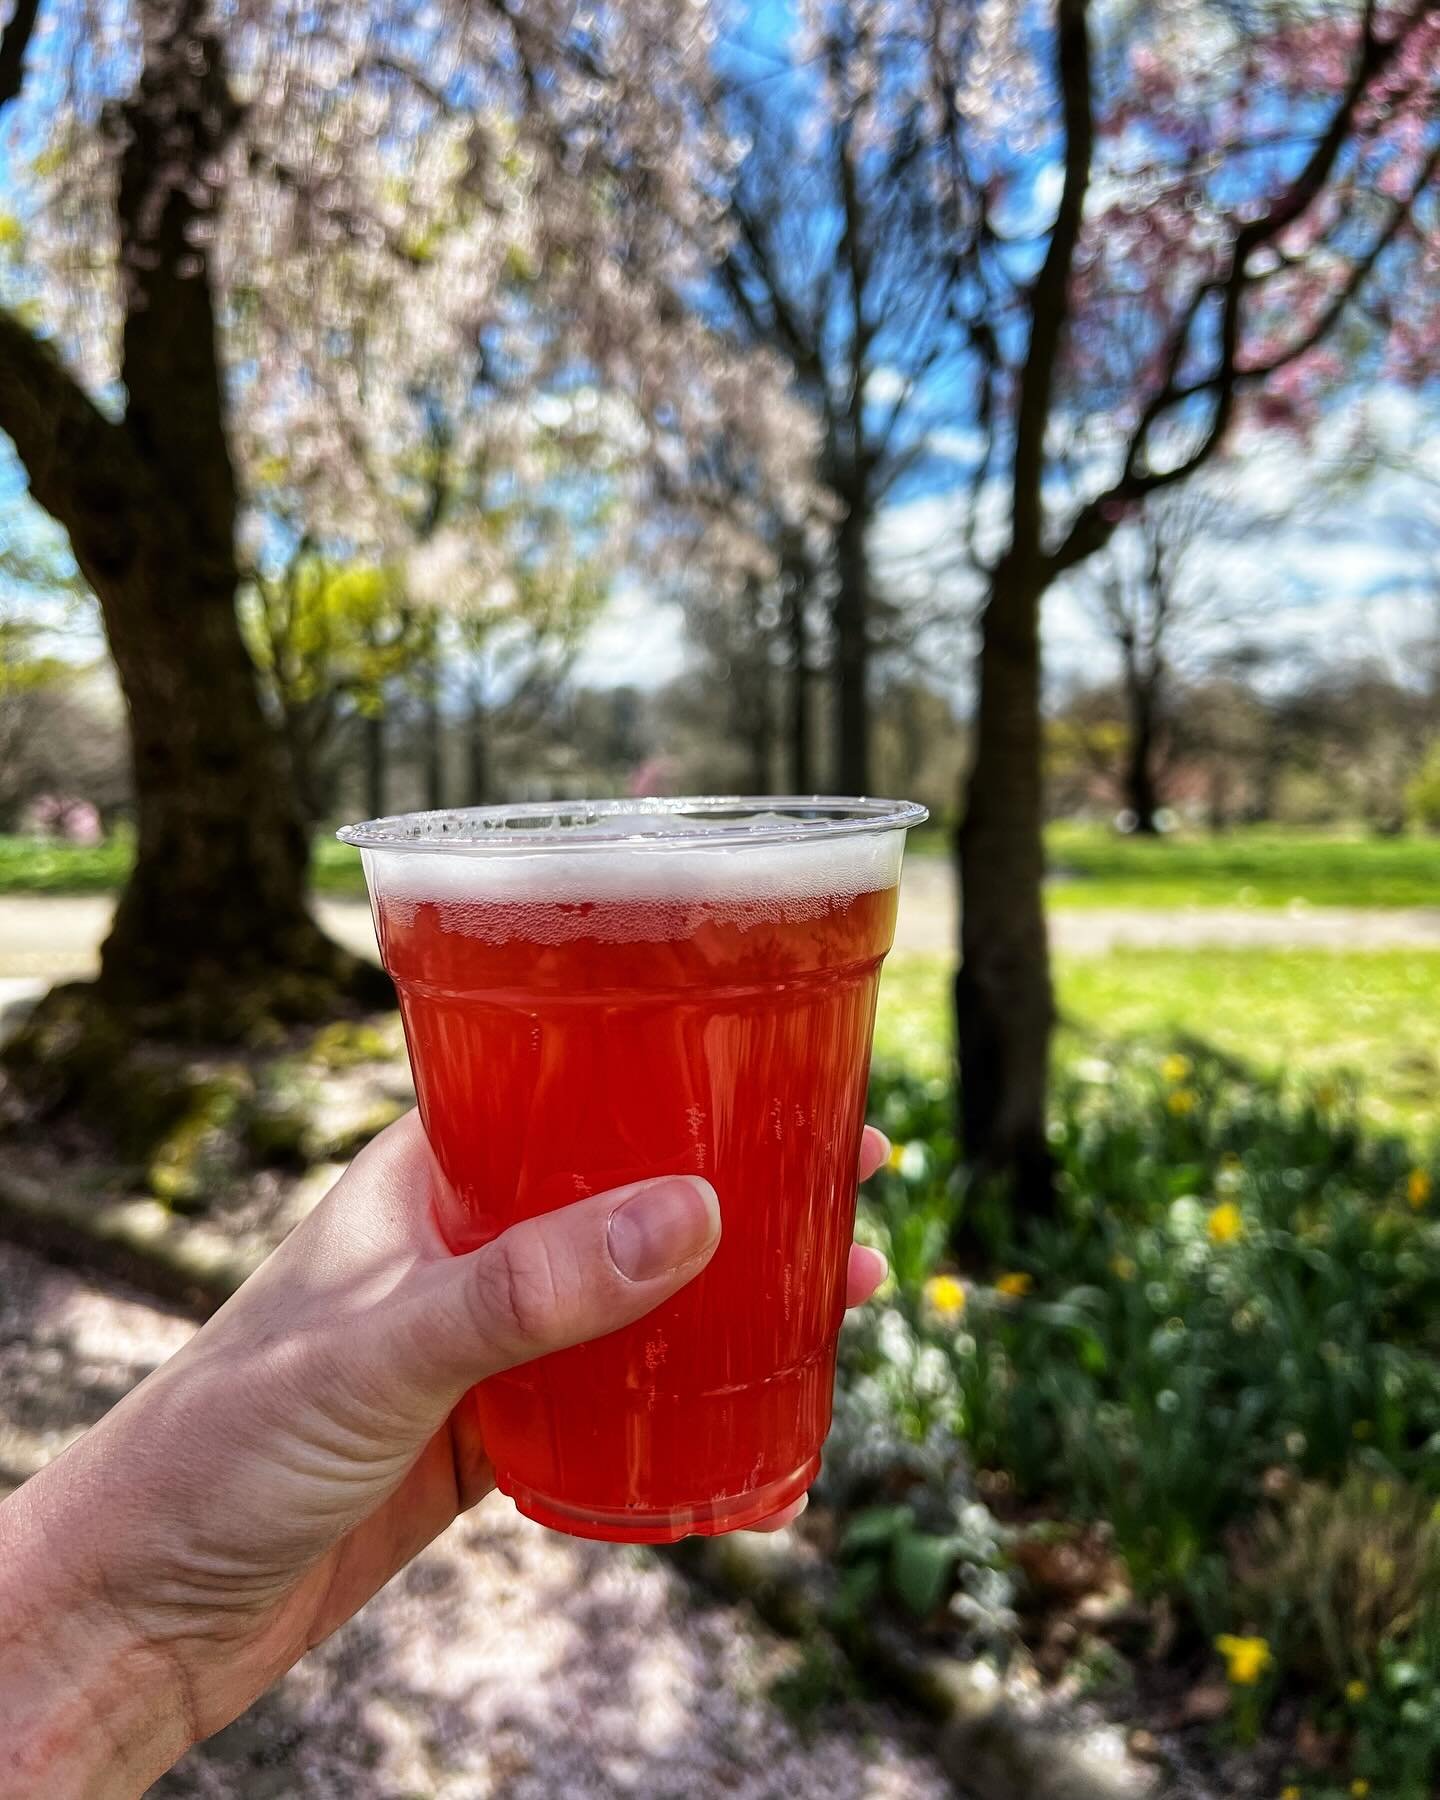 Have your tried our Secret Cherry Beer yet? 🍒🍻This American Wheat beer is made with loads of sour cherries and has delicious notes of cherry pie. At 5.5% ABV it&rsquo;s bright, a little tart, and kinda tastes pink! 💕 We&rsquo;re serving this all w